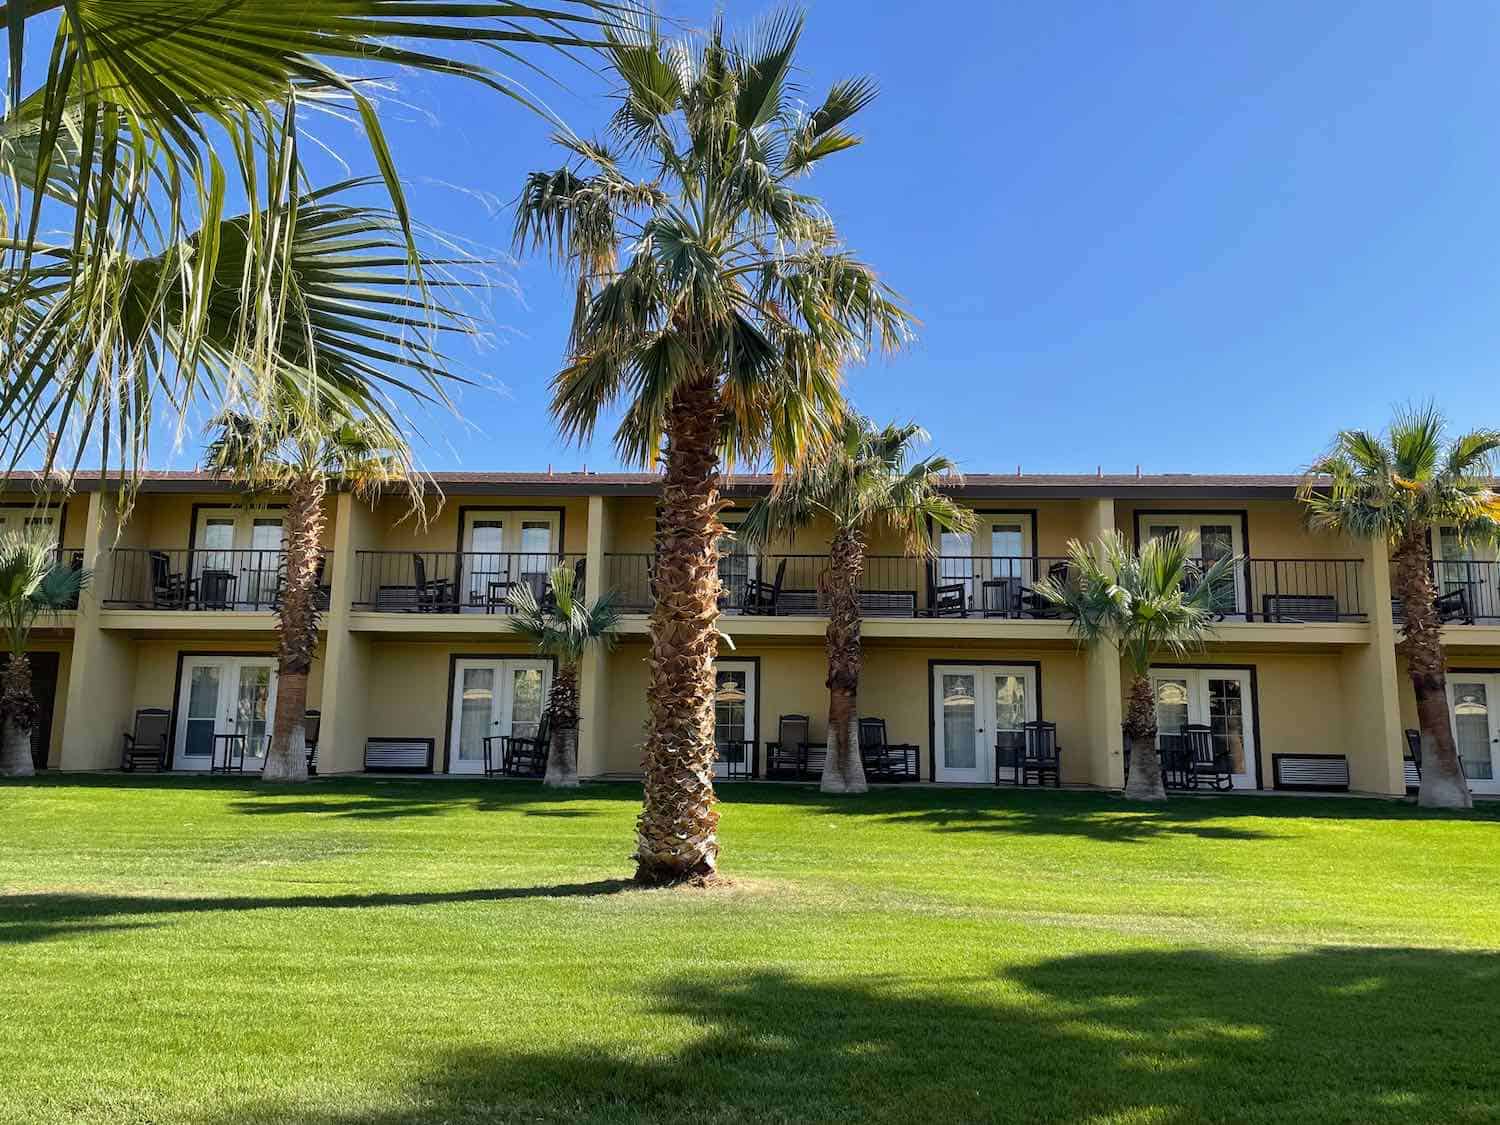 Low-slung two-story yellow buildings surrounded by green grass and palm trees at The Ranch at Death Valley.